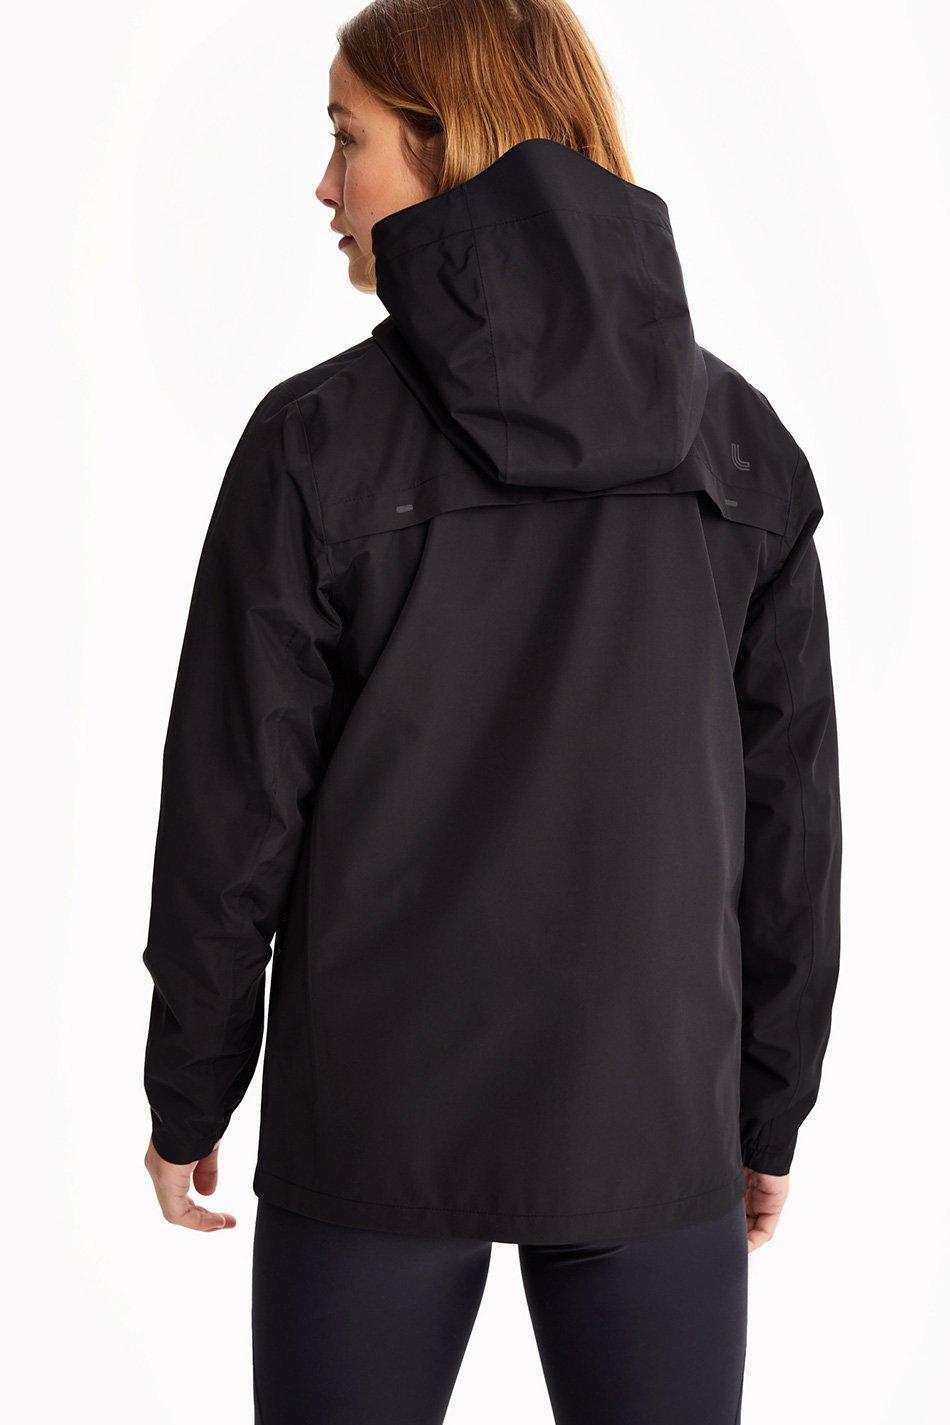 Lolë Synthetic Lainey Rain Jacket in Black - Save 30% - Lyst